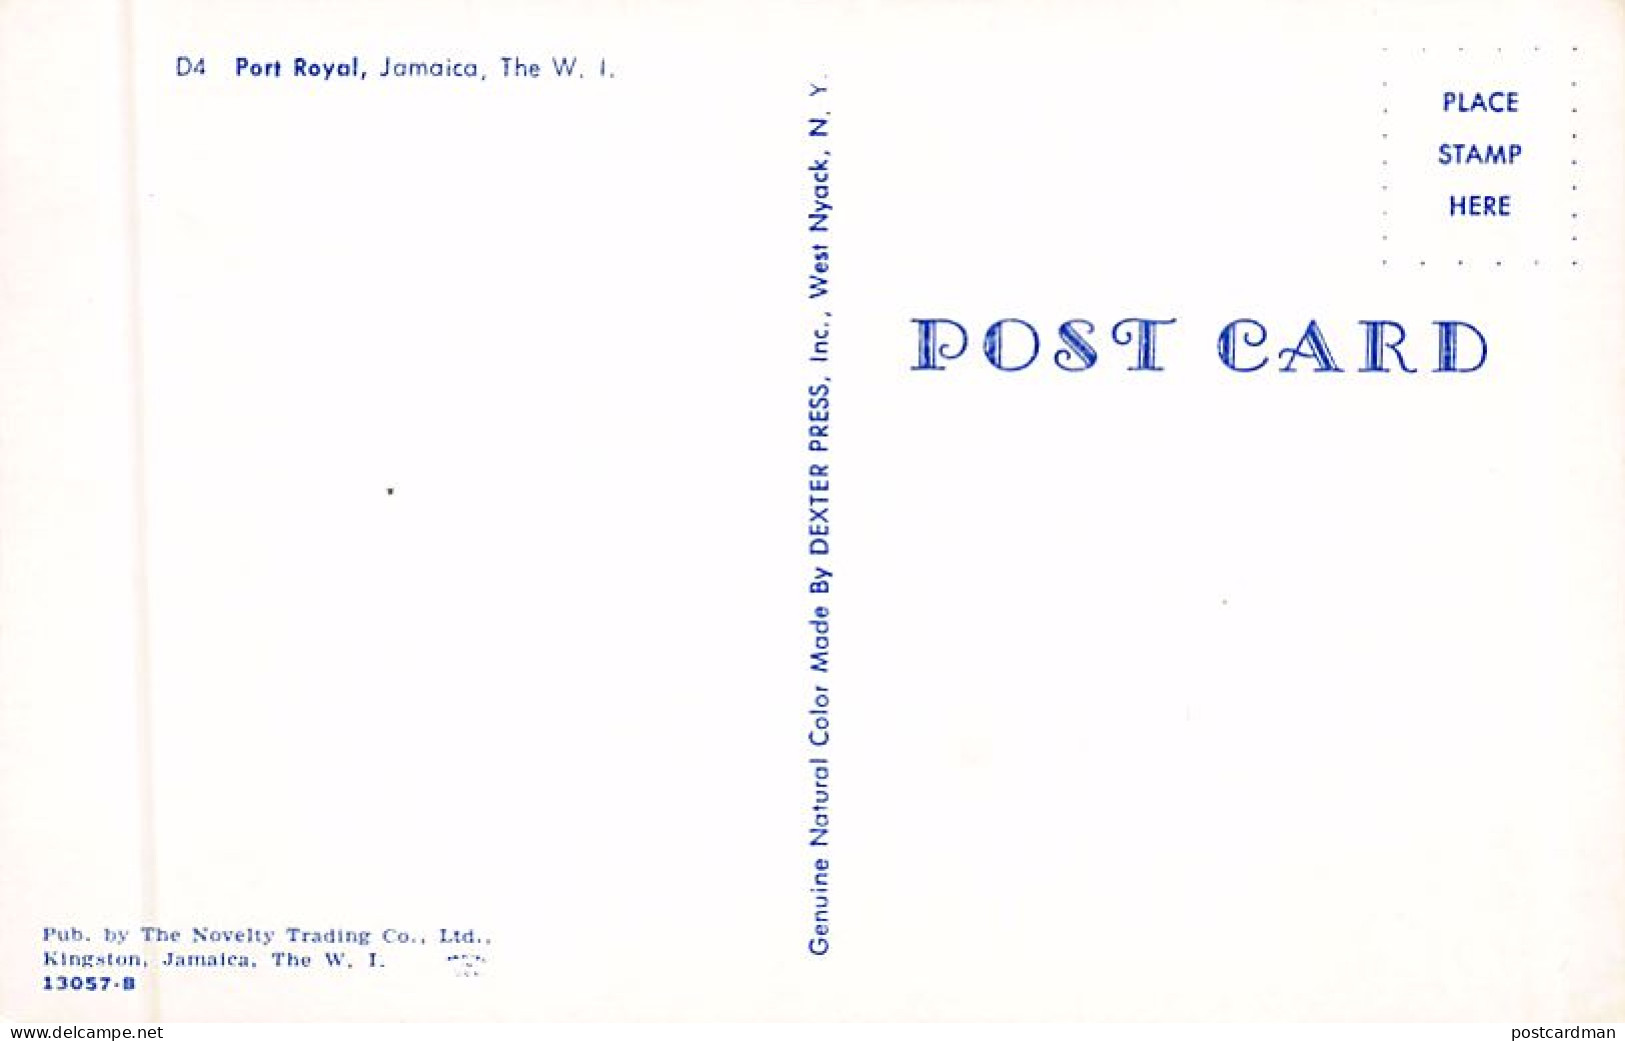 Jamaica - Port Royal - Publ. The Novelty Trading Co. 13057 - Giamaica